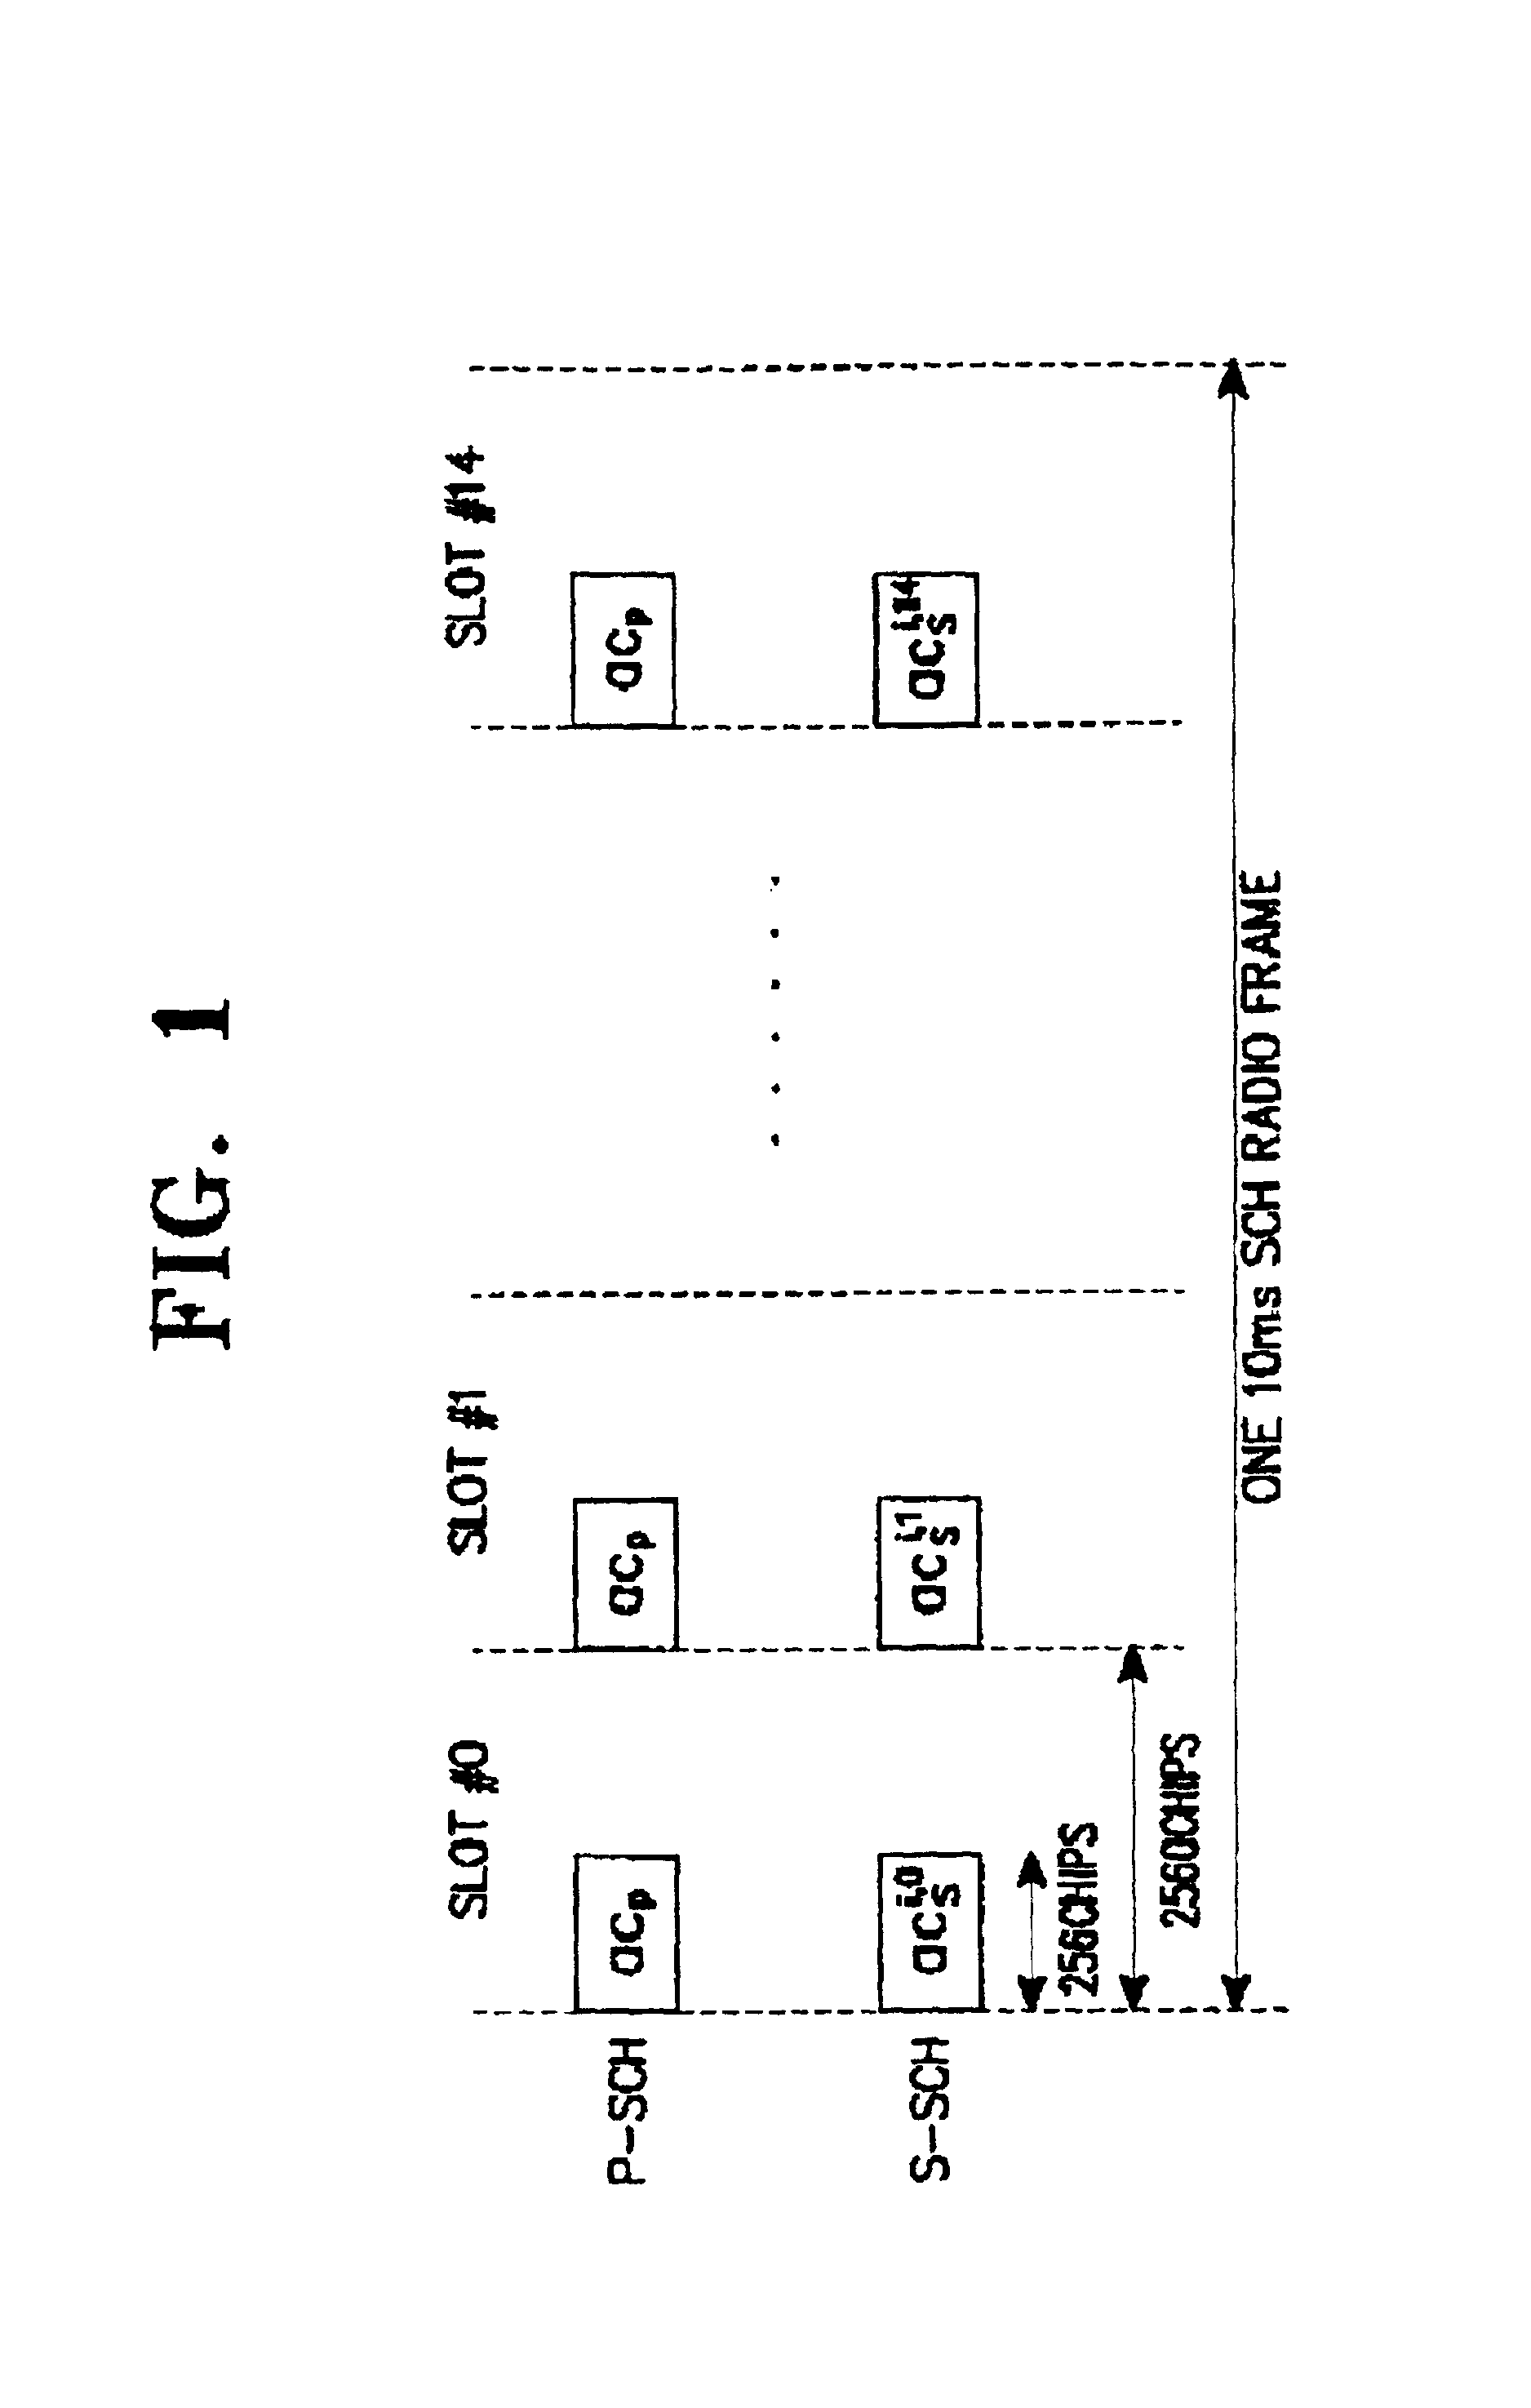 Apparatus and method for searching a base station in an asynchronous mobile communications system